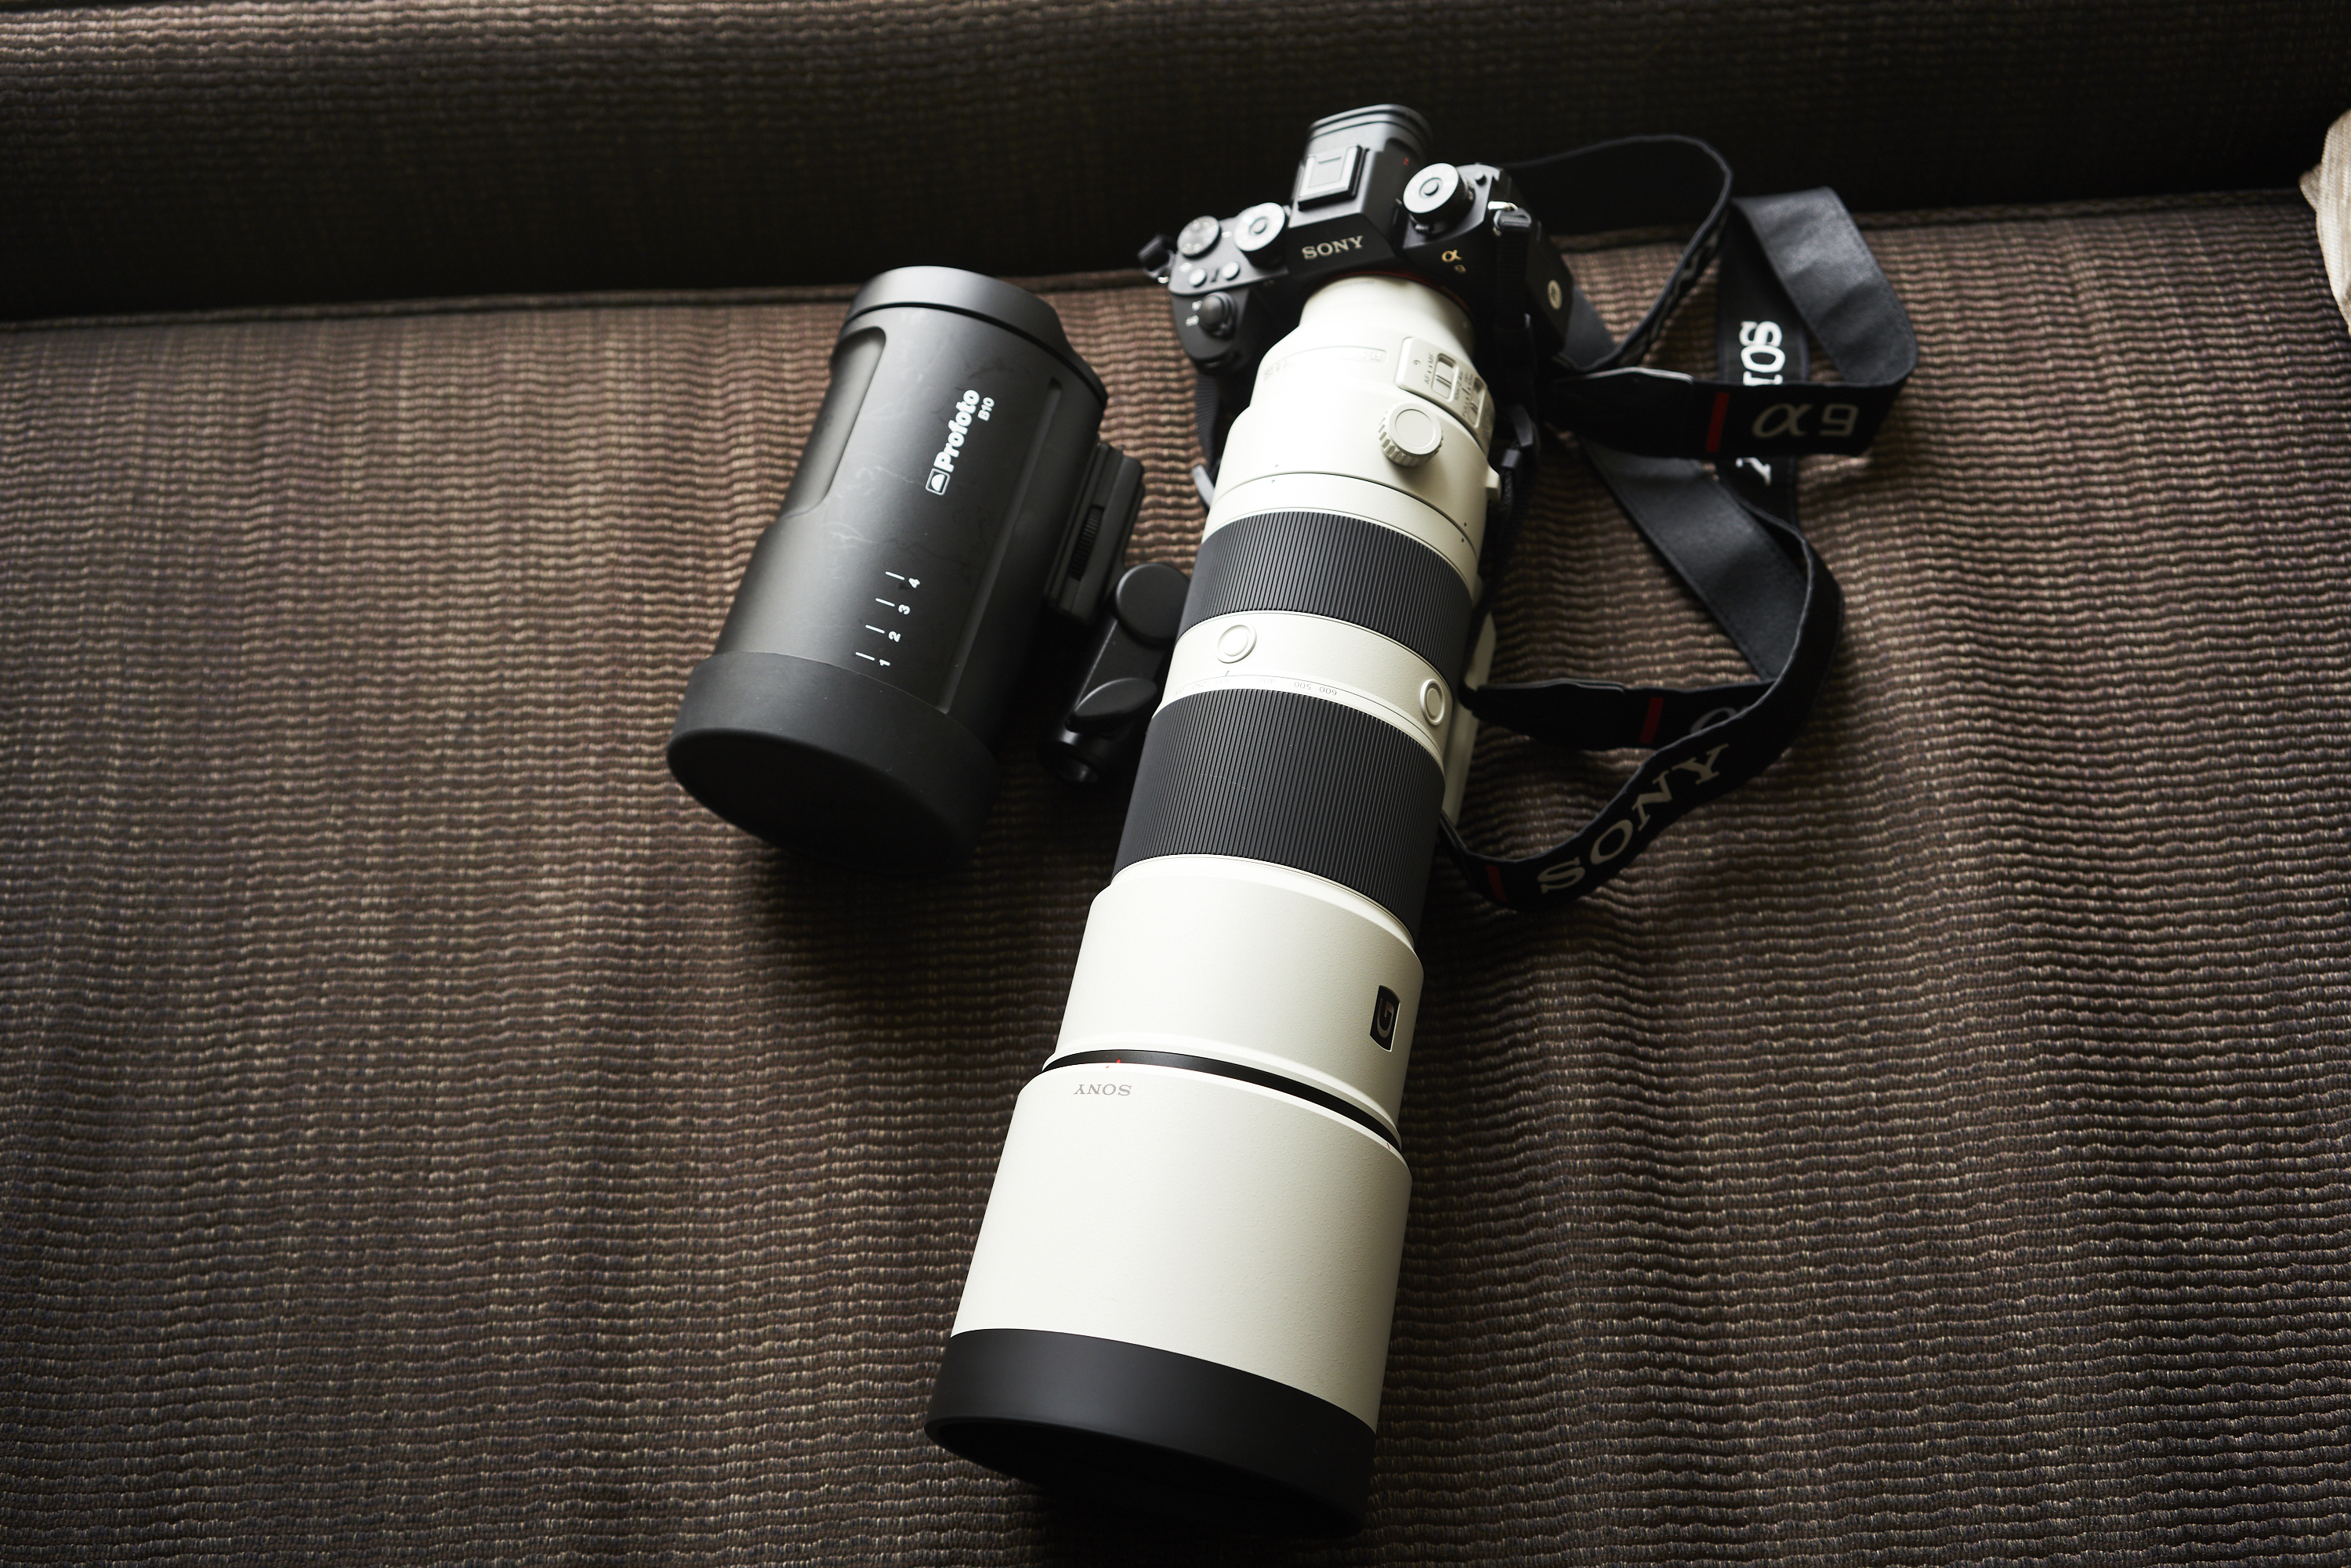 Chris Gampat The Phoblographer Sony 200-600mm f5.6-6.3 G OSS product images 5